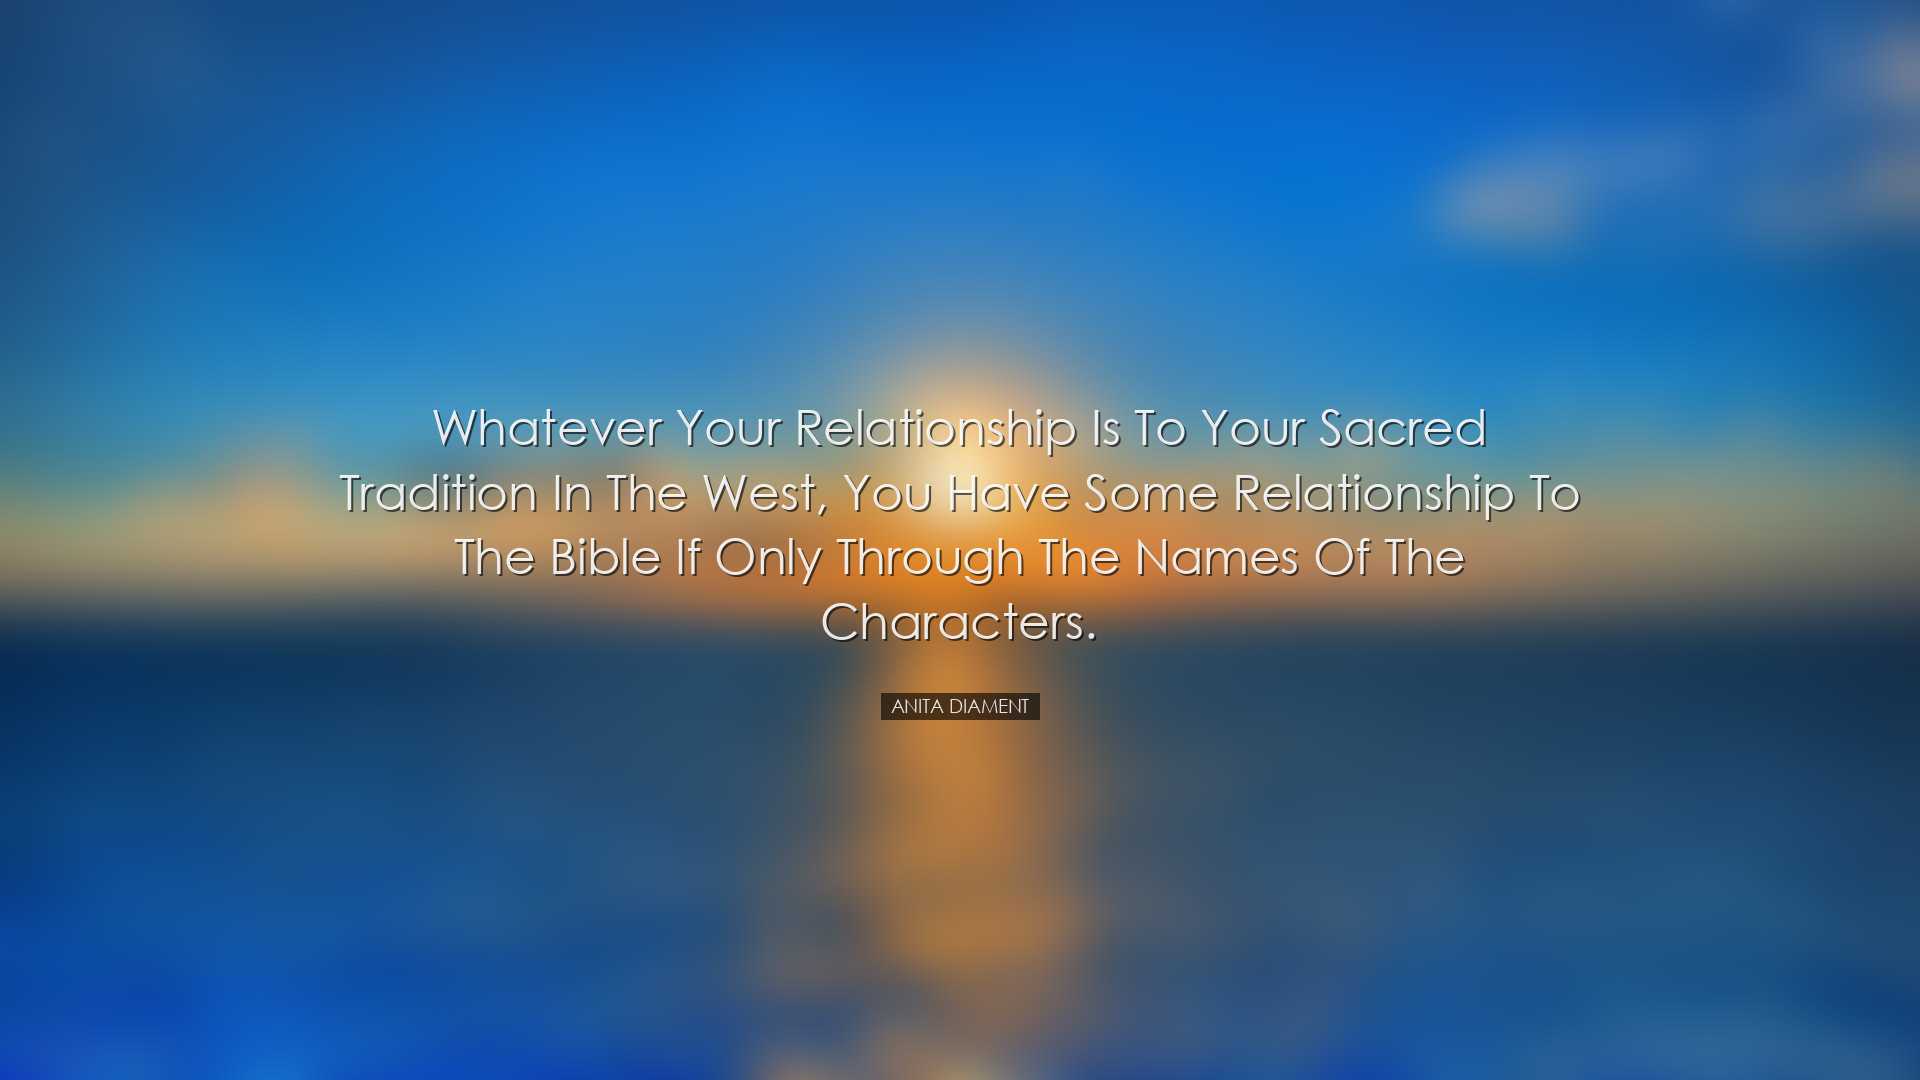 Whatever your relationship is to your sacred tradition in the West